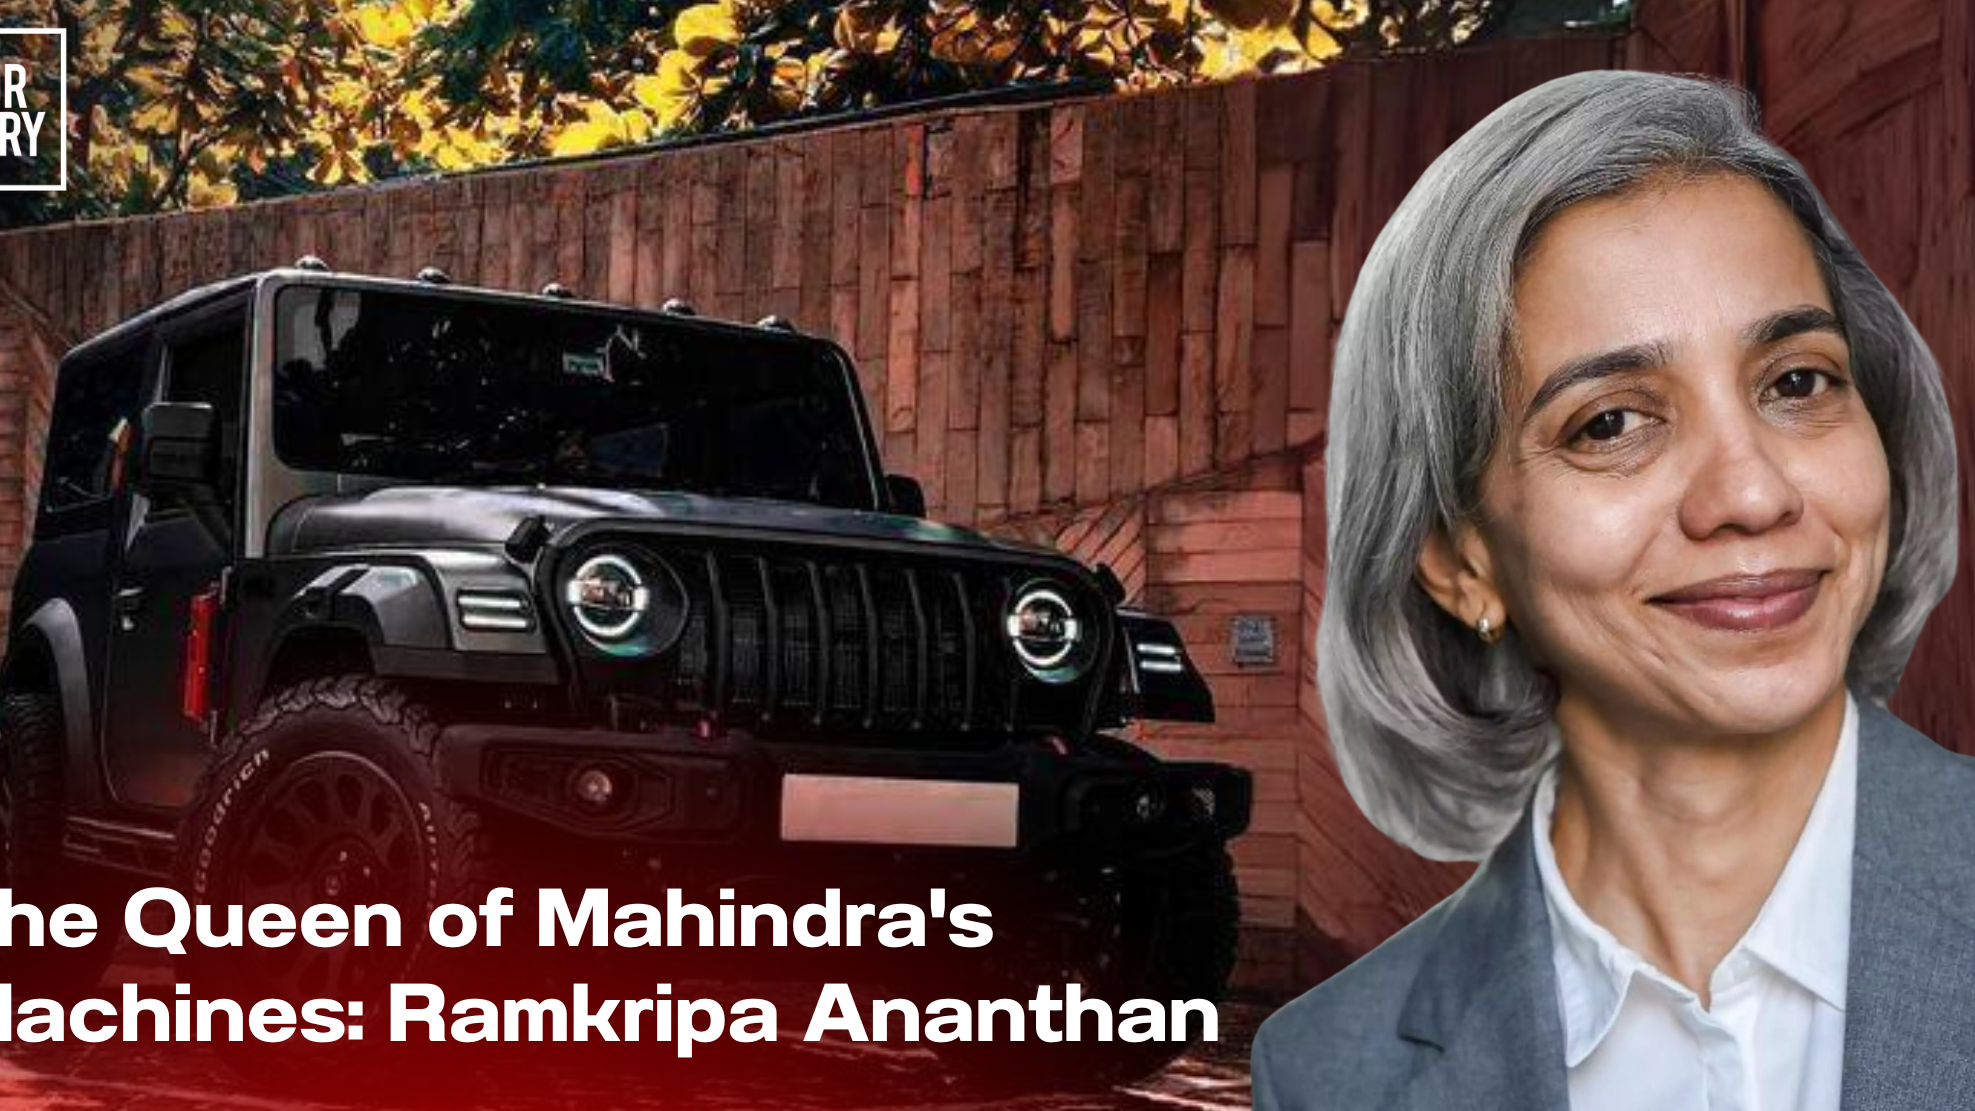 The Queen of Mahindra's Machines: Is Ramkripa Ananthan the Future of Indian Auto Design?